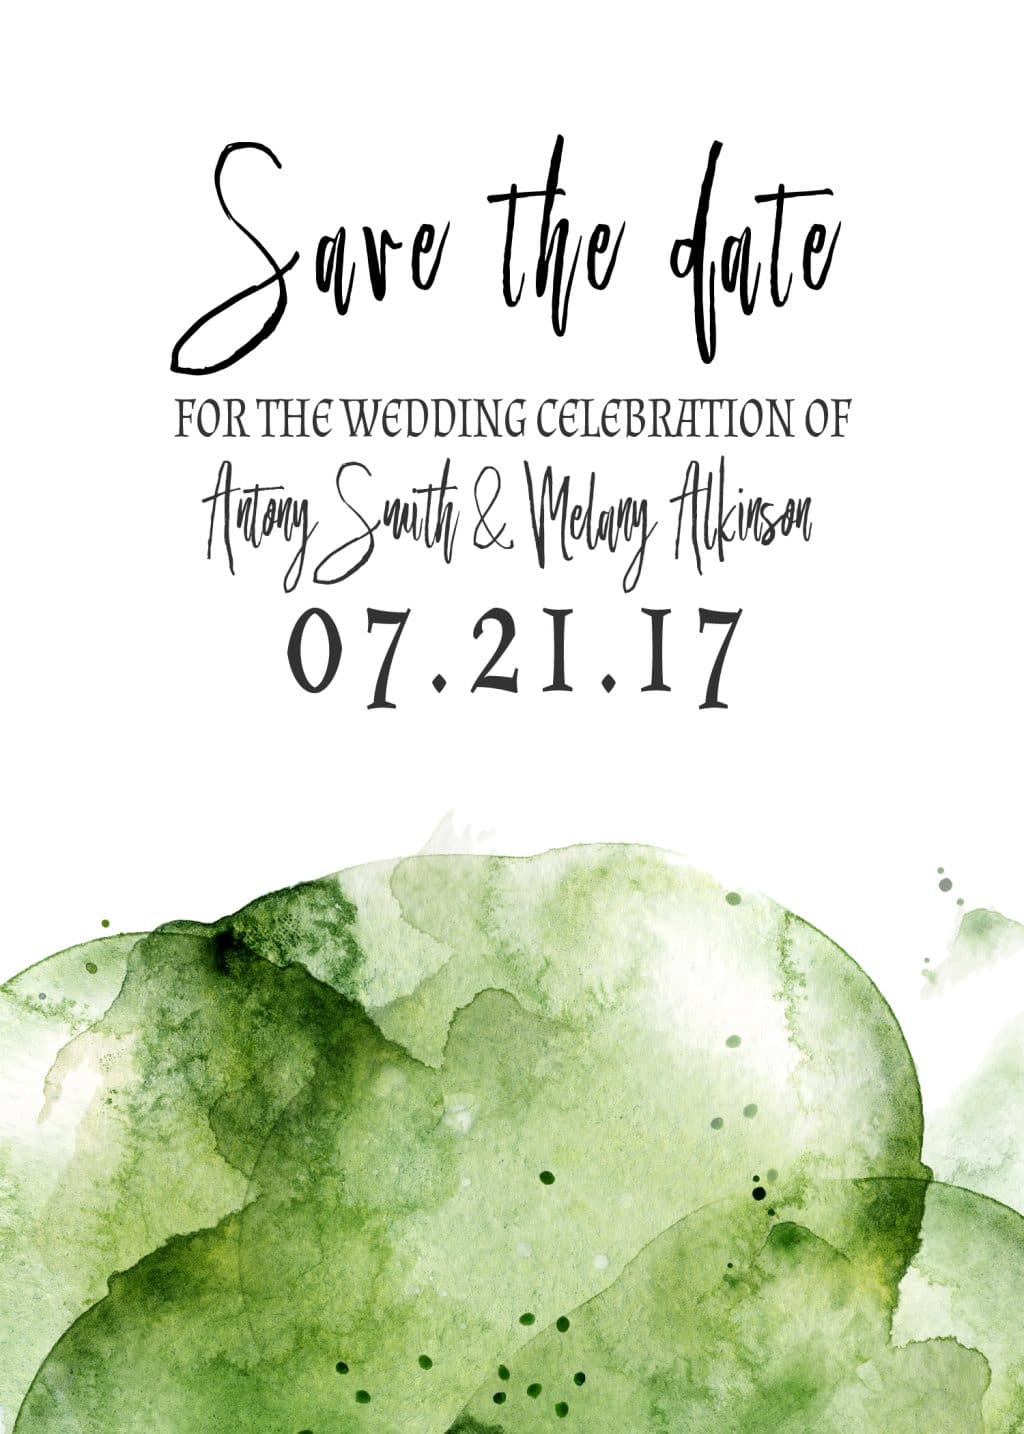 The Best Save the Date Cards